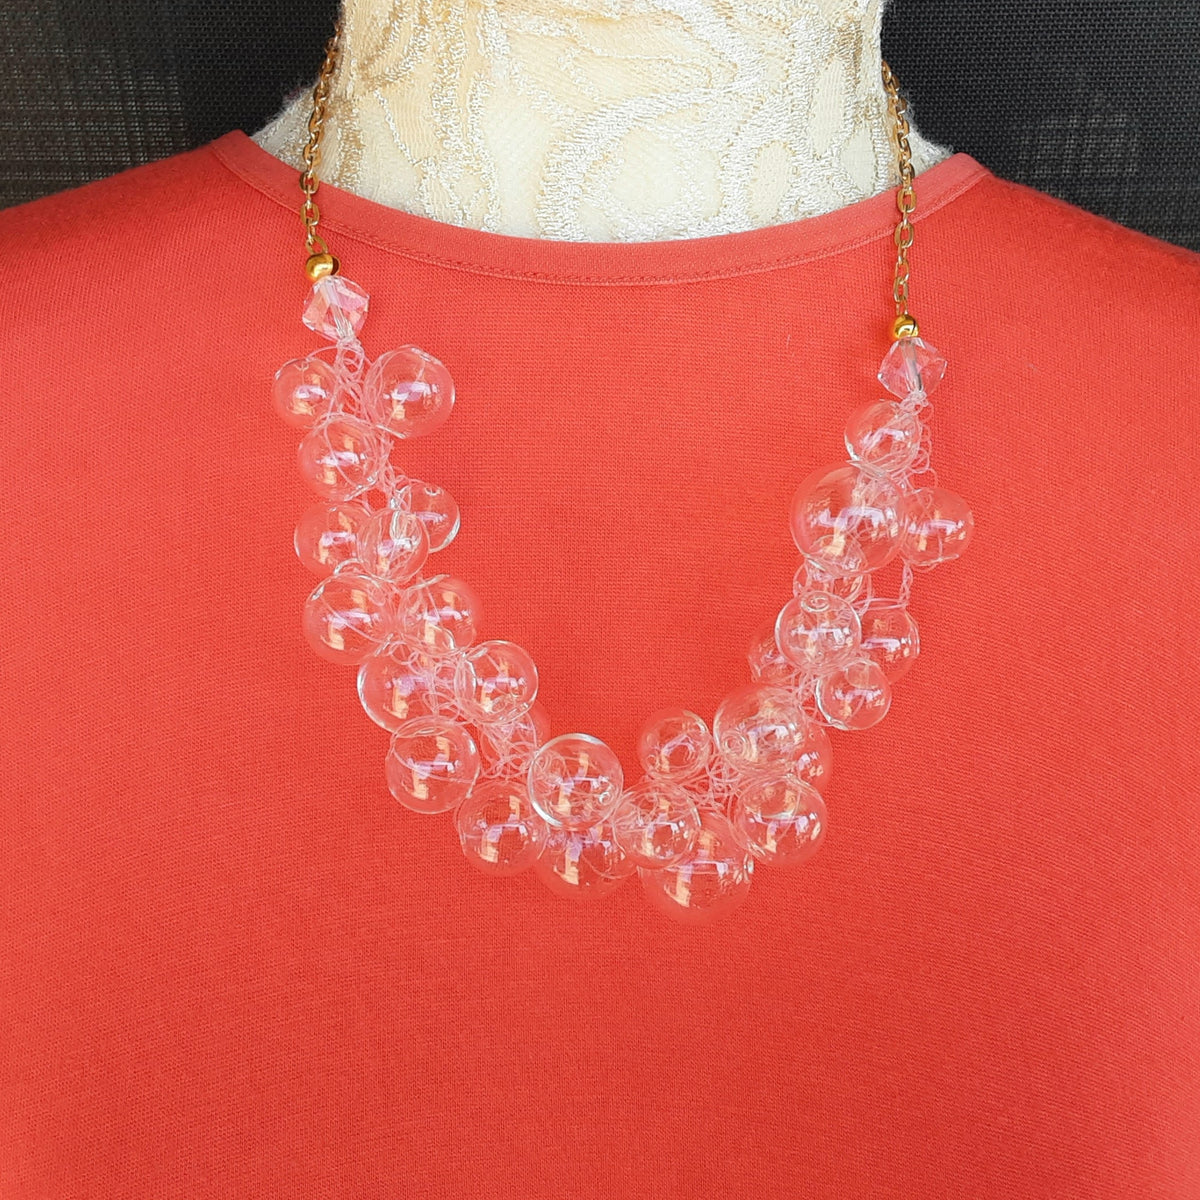 Clear Hand Blown All Glass Bubble Statement Necklace - Crocheted Gift for Her - Designer Inspired